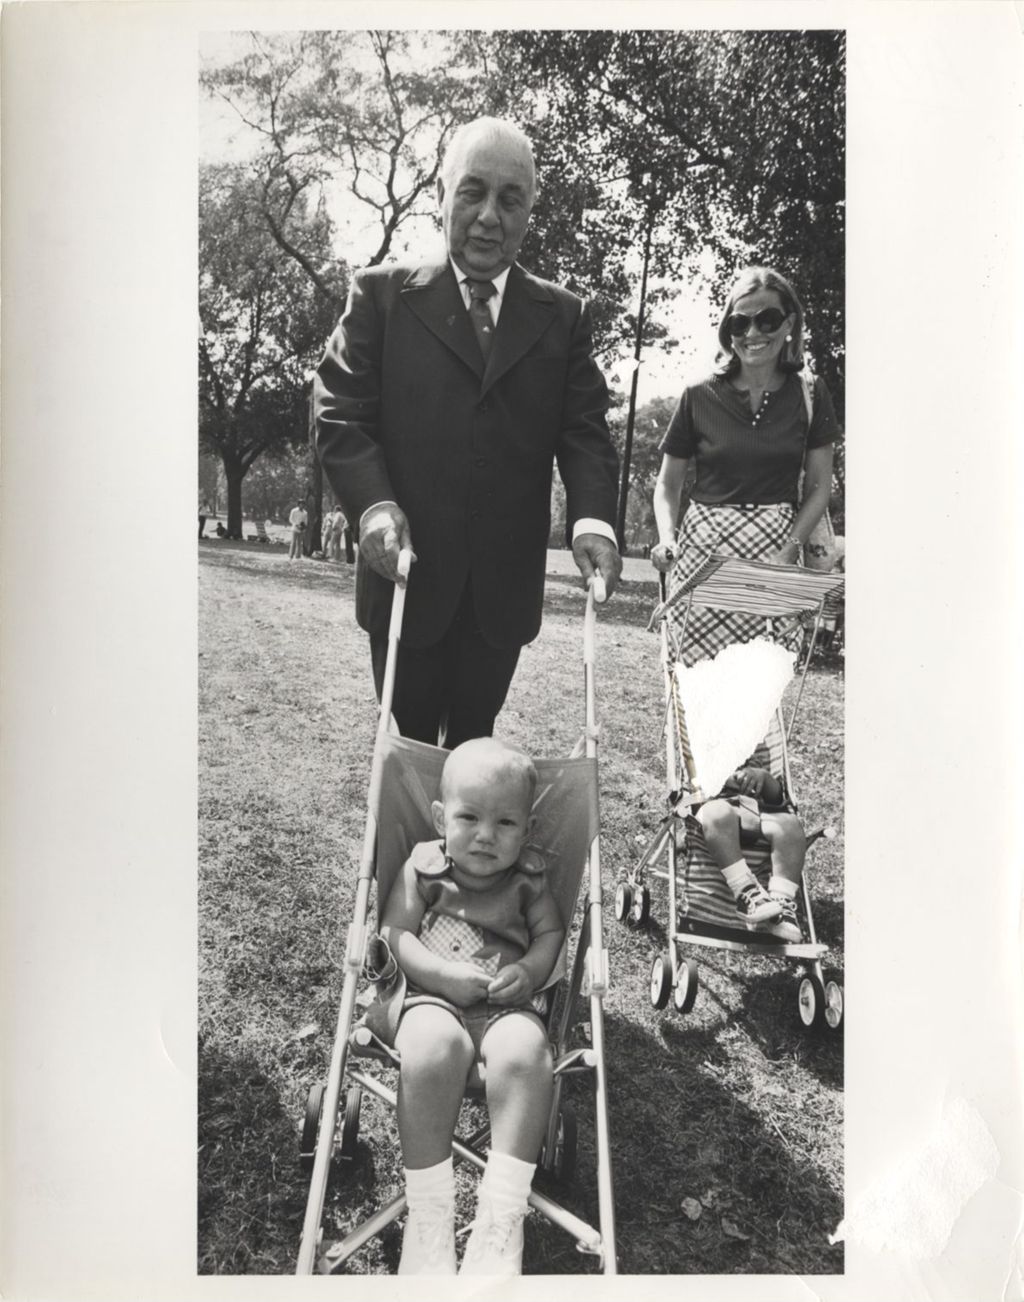 Miniature of Richard J. Daley with grandchildren in strollers